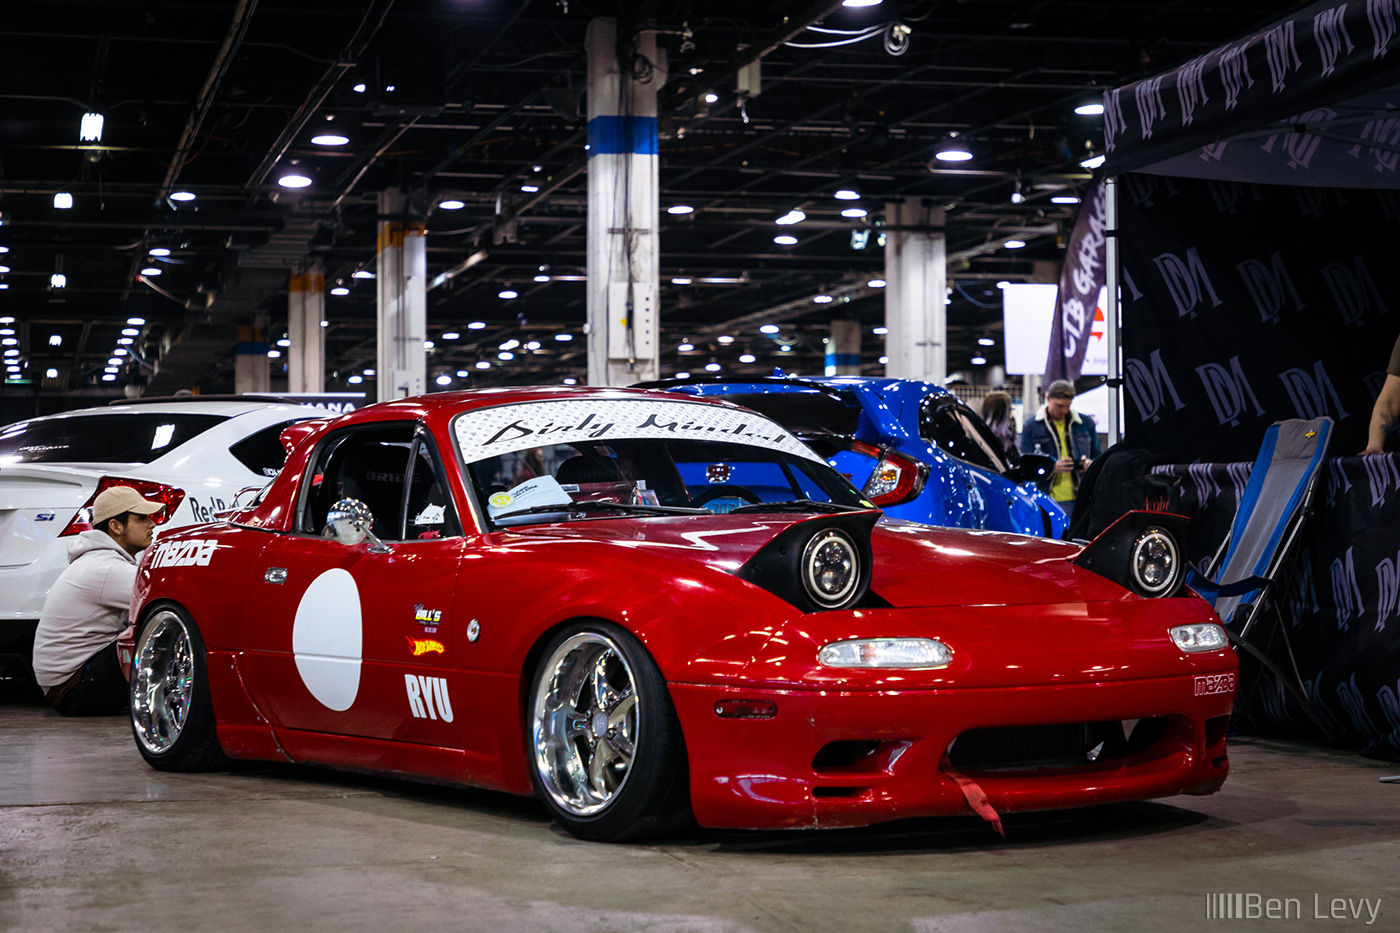 Red Mazda Miata by Dirty Minded booth